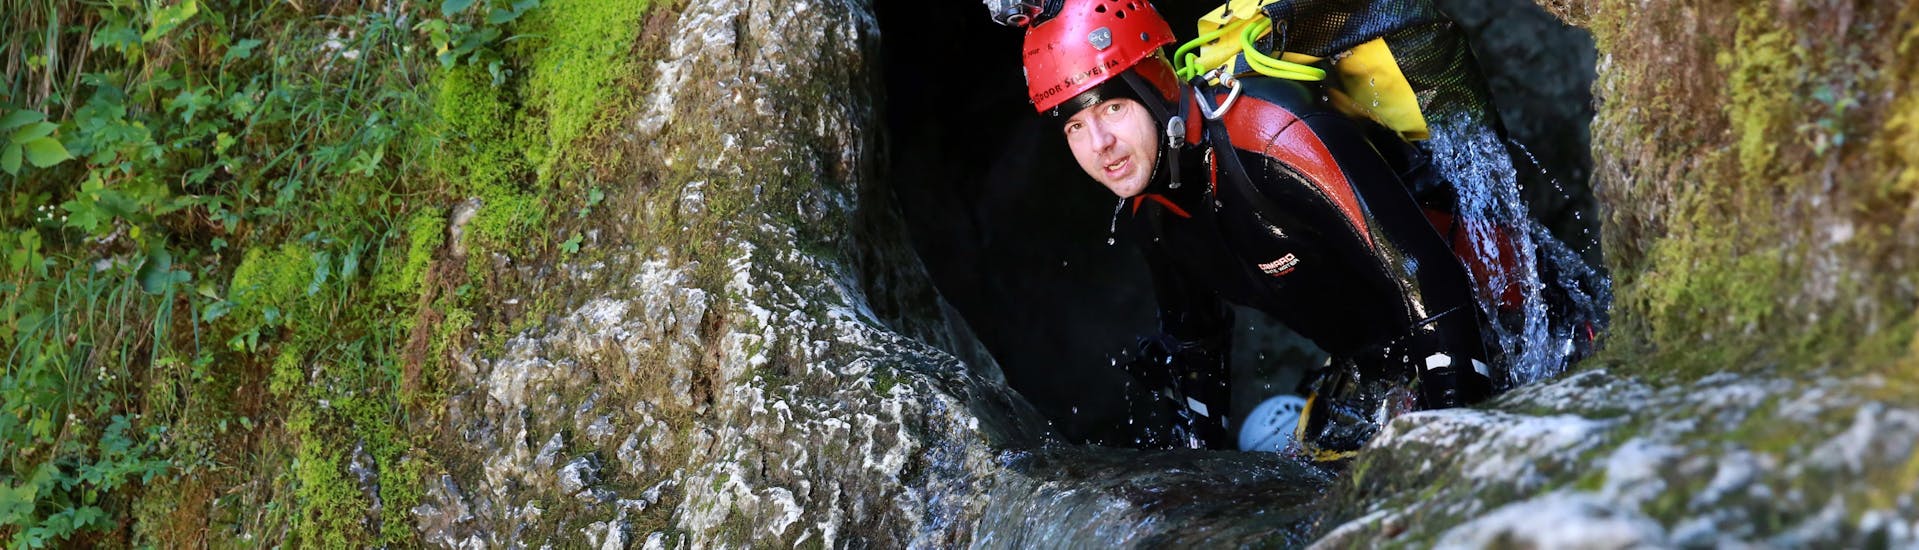 A Man in a Cave during Rafting & Canyoning Combo on the Sava River with Sava rafting Bled.